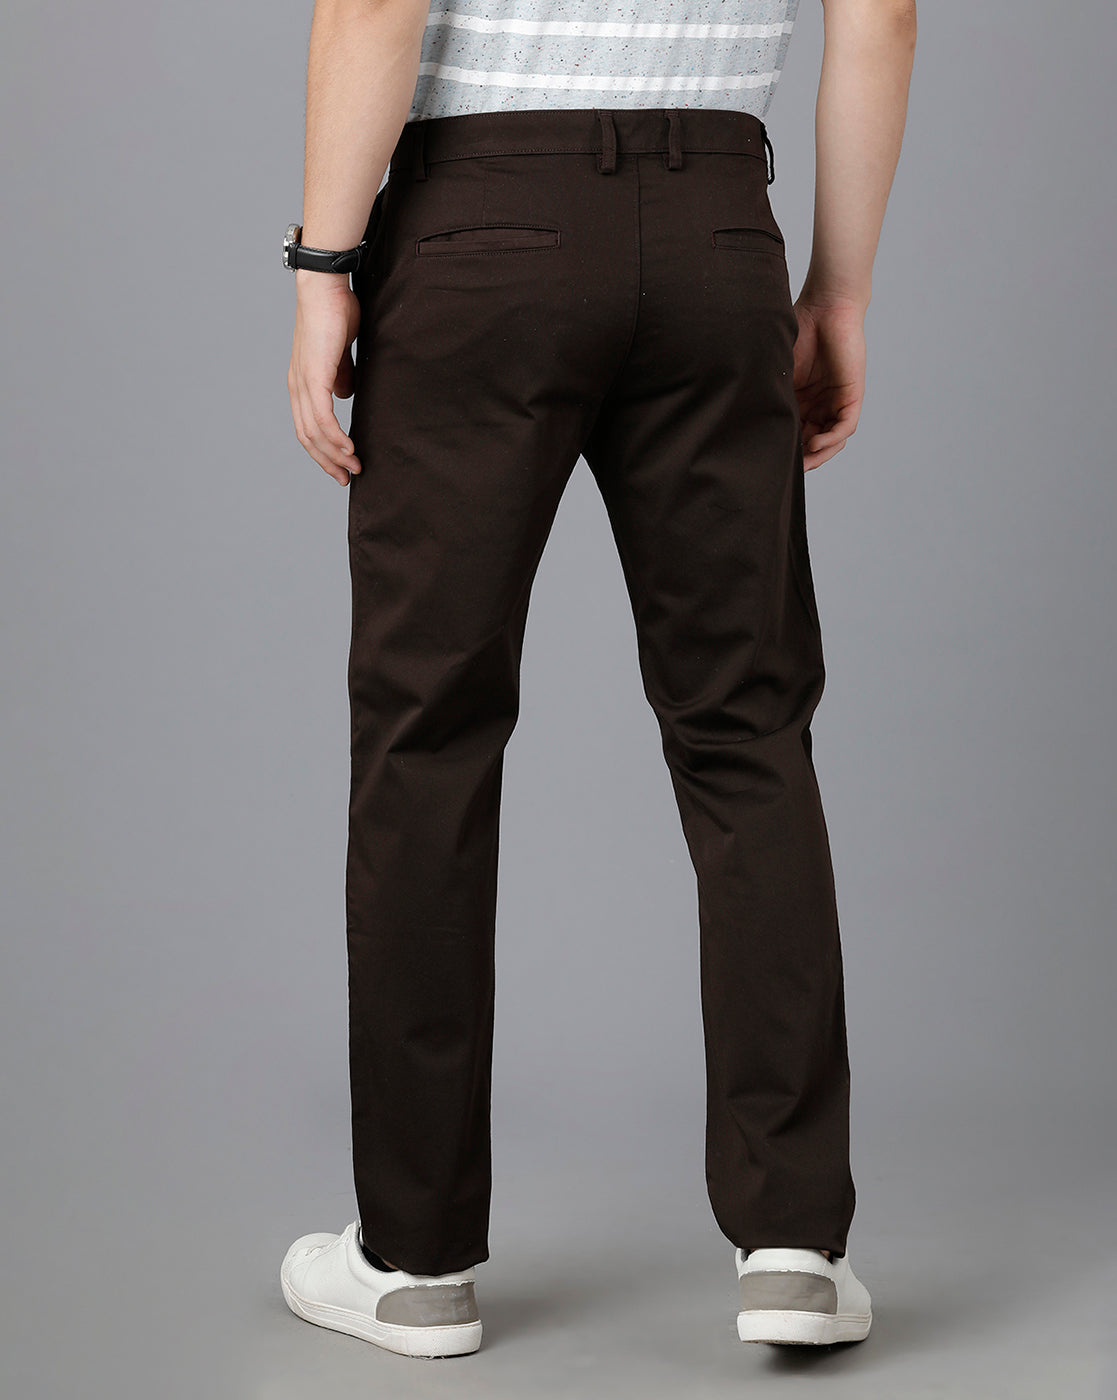 Buy Regular Trouser Pants Gray Brown and Black Combo of 3 Cotton for Best  Price Reviews Free Shipping